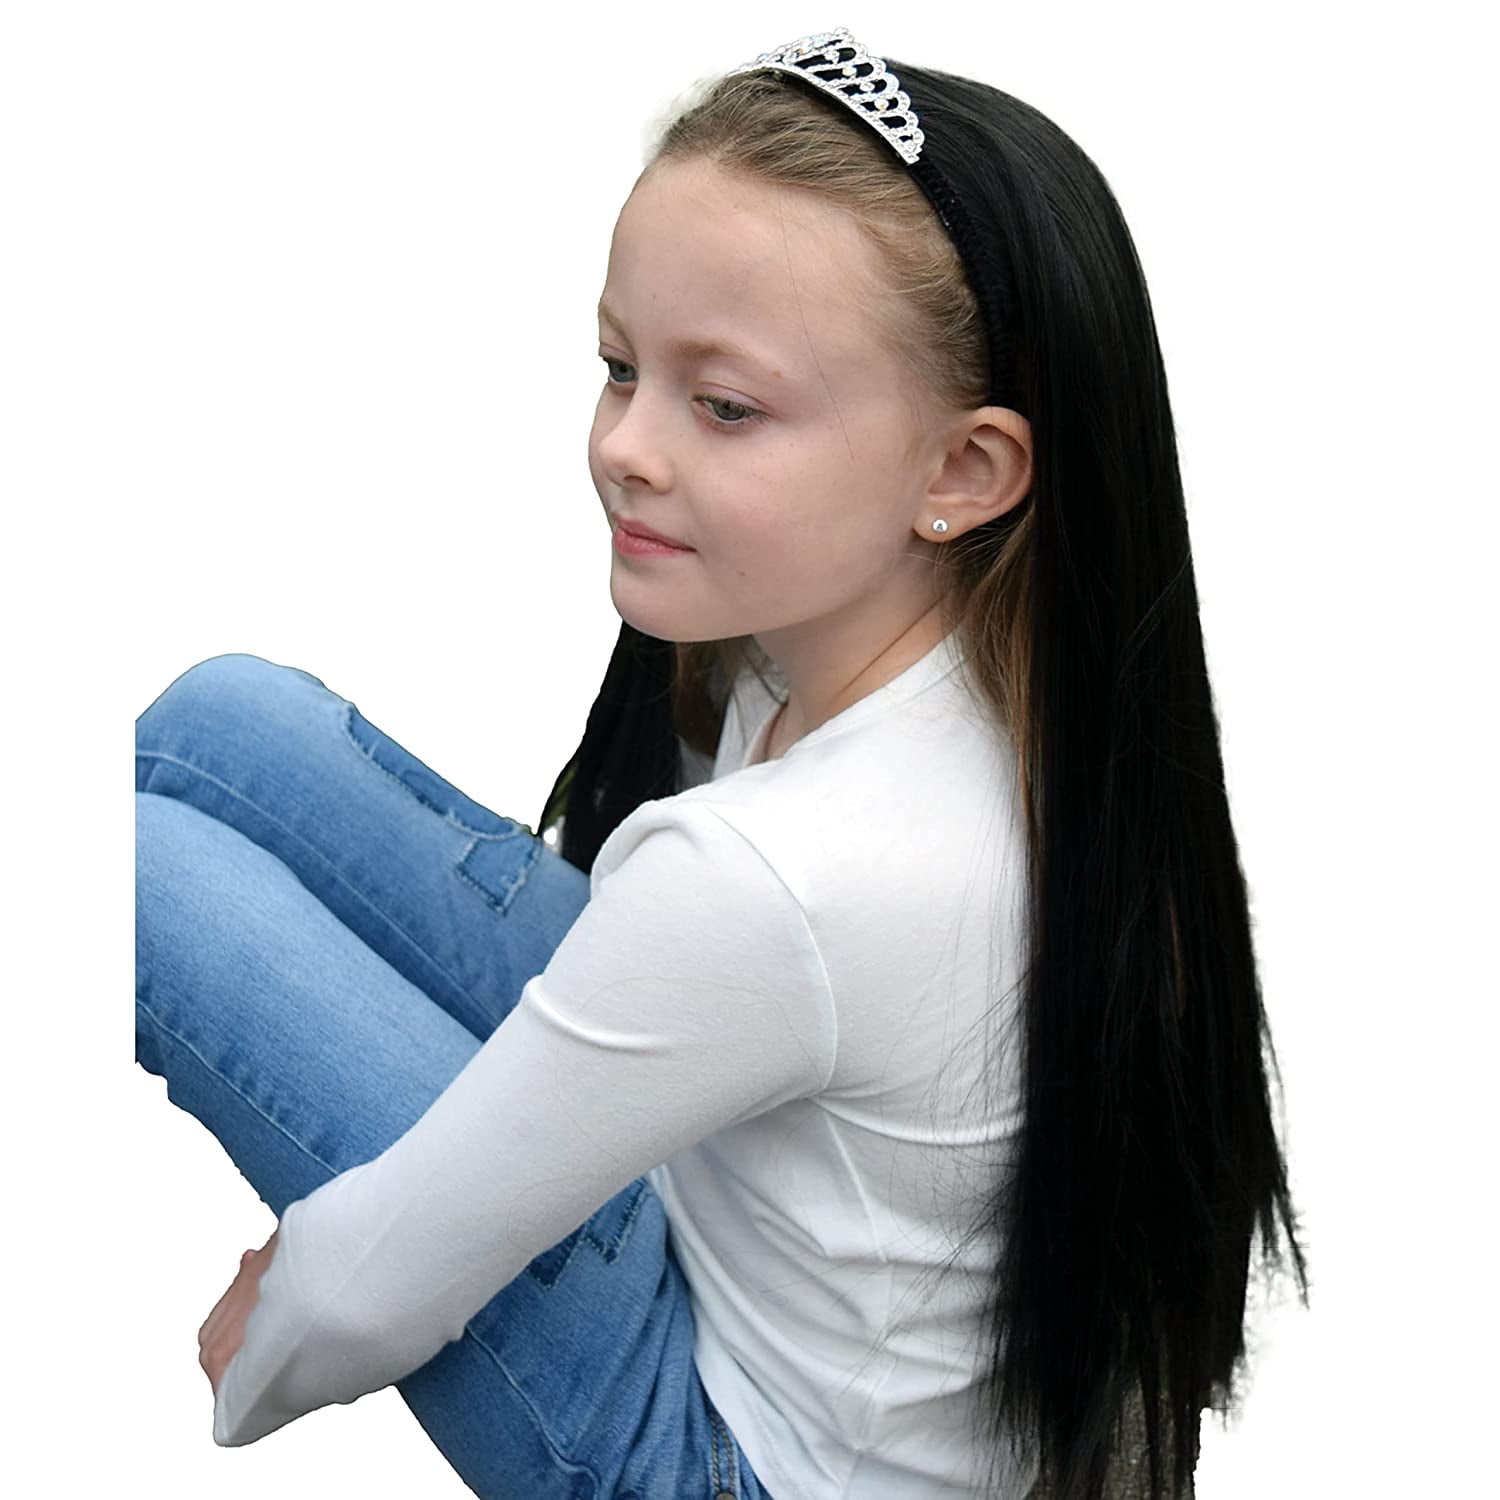 Easy to Attach Hairband for Child Friendly Use My Hair Popz Deluxe Synthetic Fiber Black Princess Wig with Rhinestone Encrusted Tiara Headband Heat and Tangle Resistant Costume Wig for Kids 